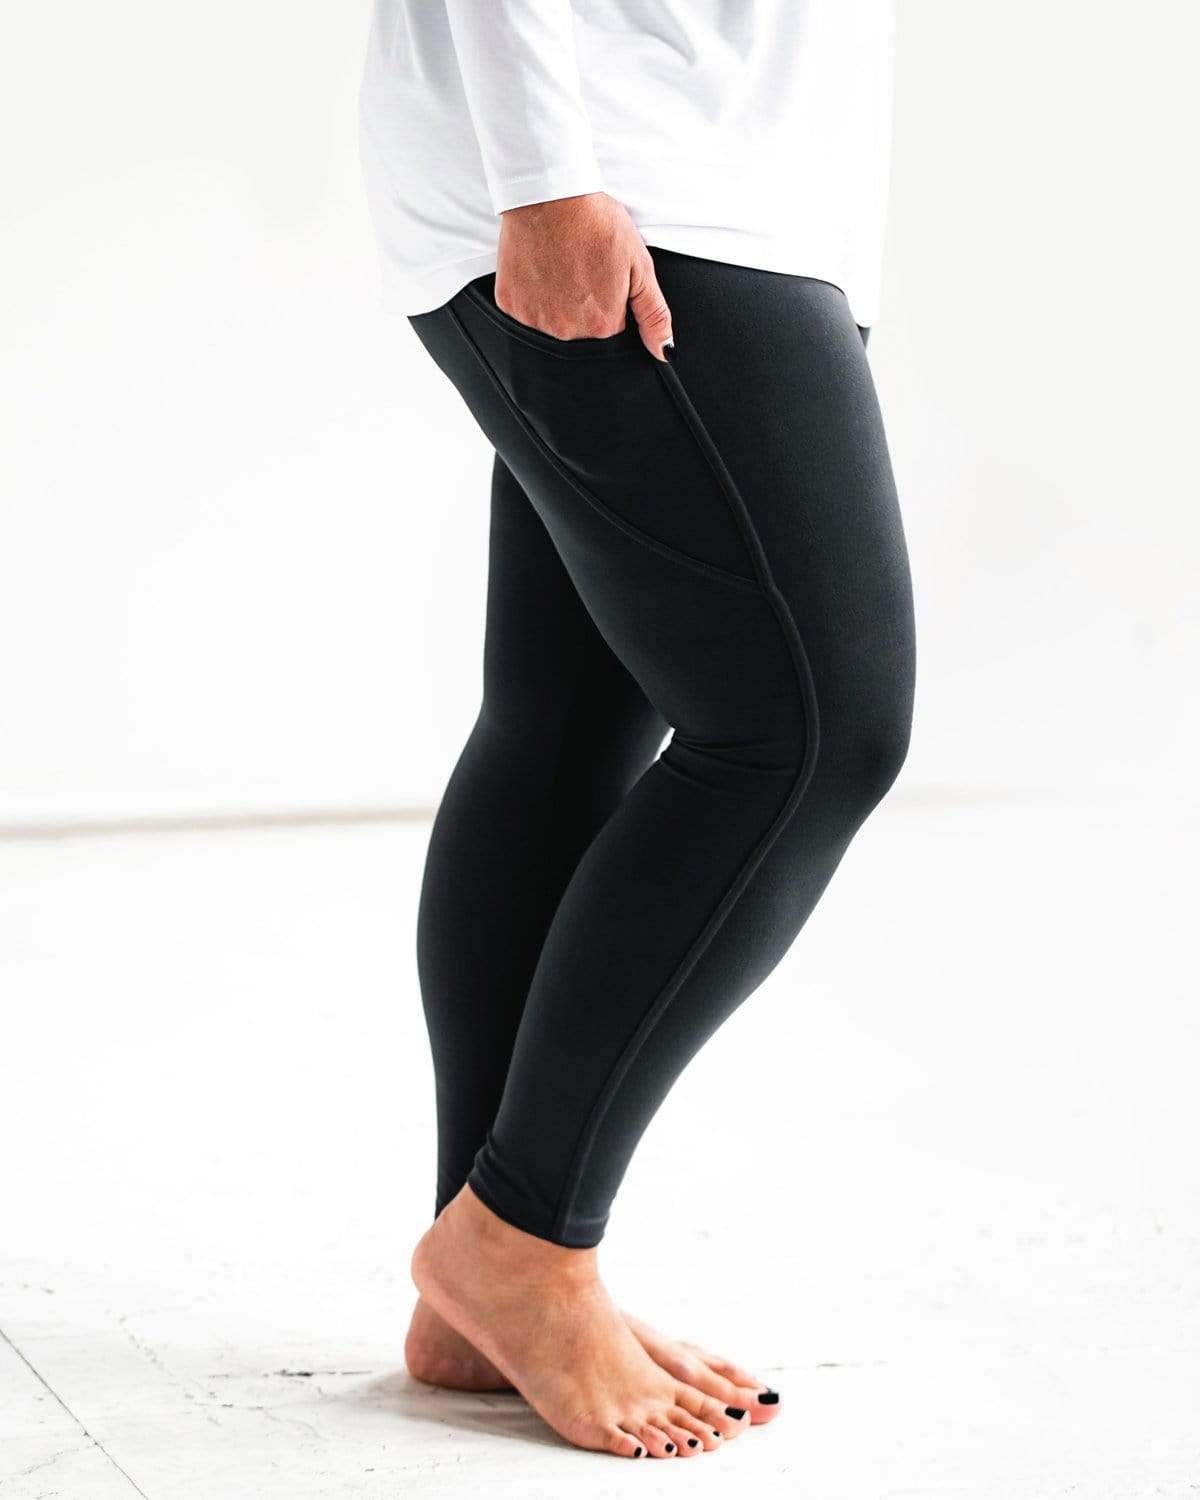 Over The Belly Pregnancy Yoga Pants with Pockets Soft Activewear